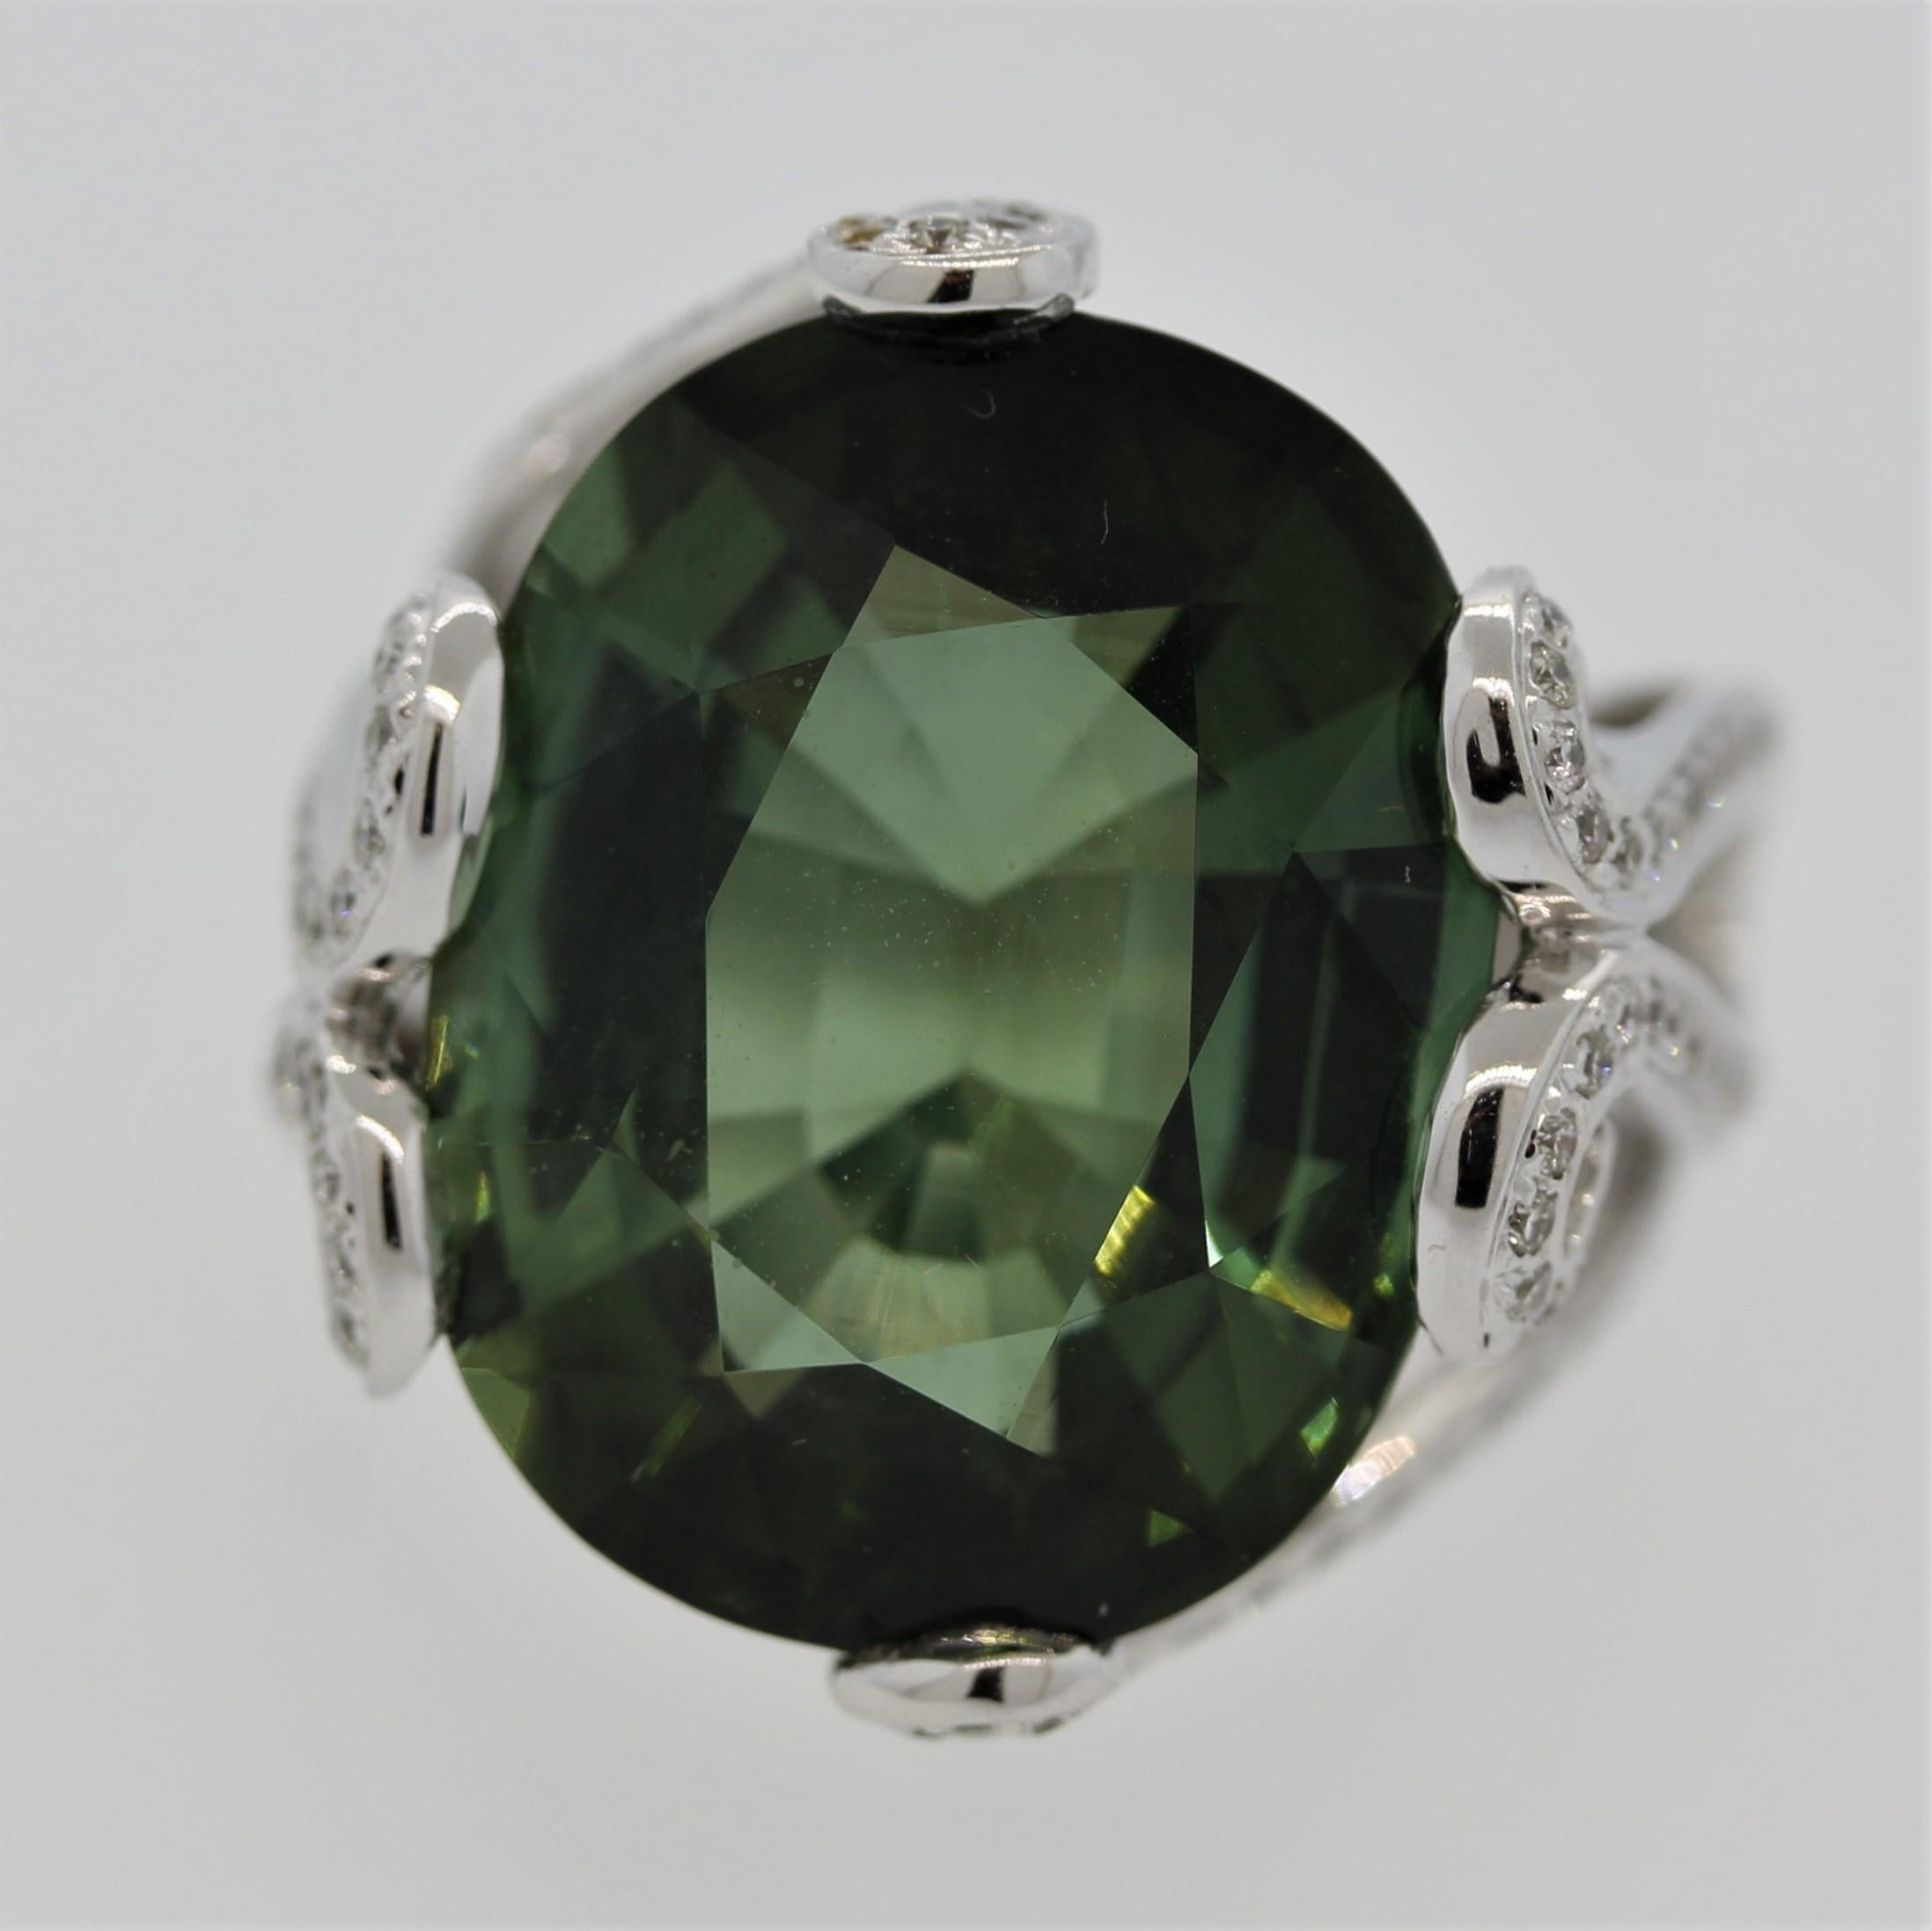 A beautiful 22.95 carat green tourmaline is featured in an 18k white gold ring. It is cut as a lovely oval and has a clean green color with a hint of blue with no visible inclusions. It is accented by 0.60 carats of round brilliant cut diamonds